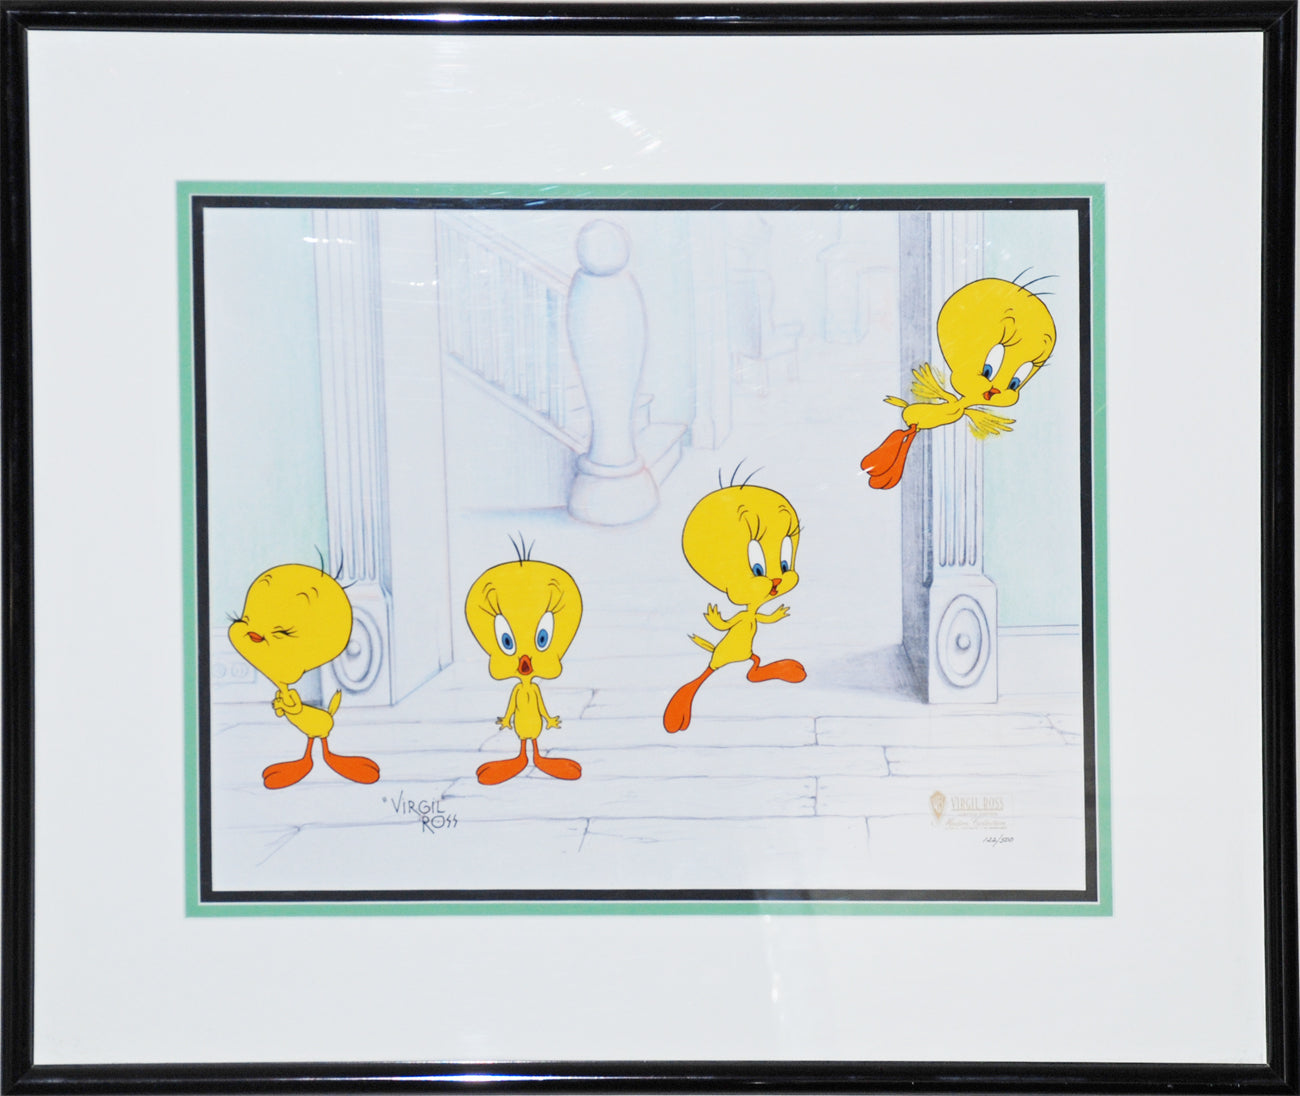 Original Warner Brothers Limited Edition Cel featuring Tweety